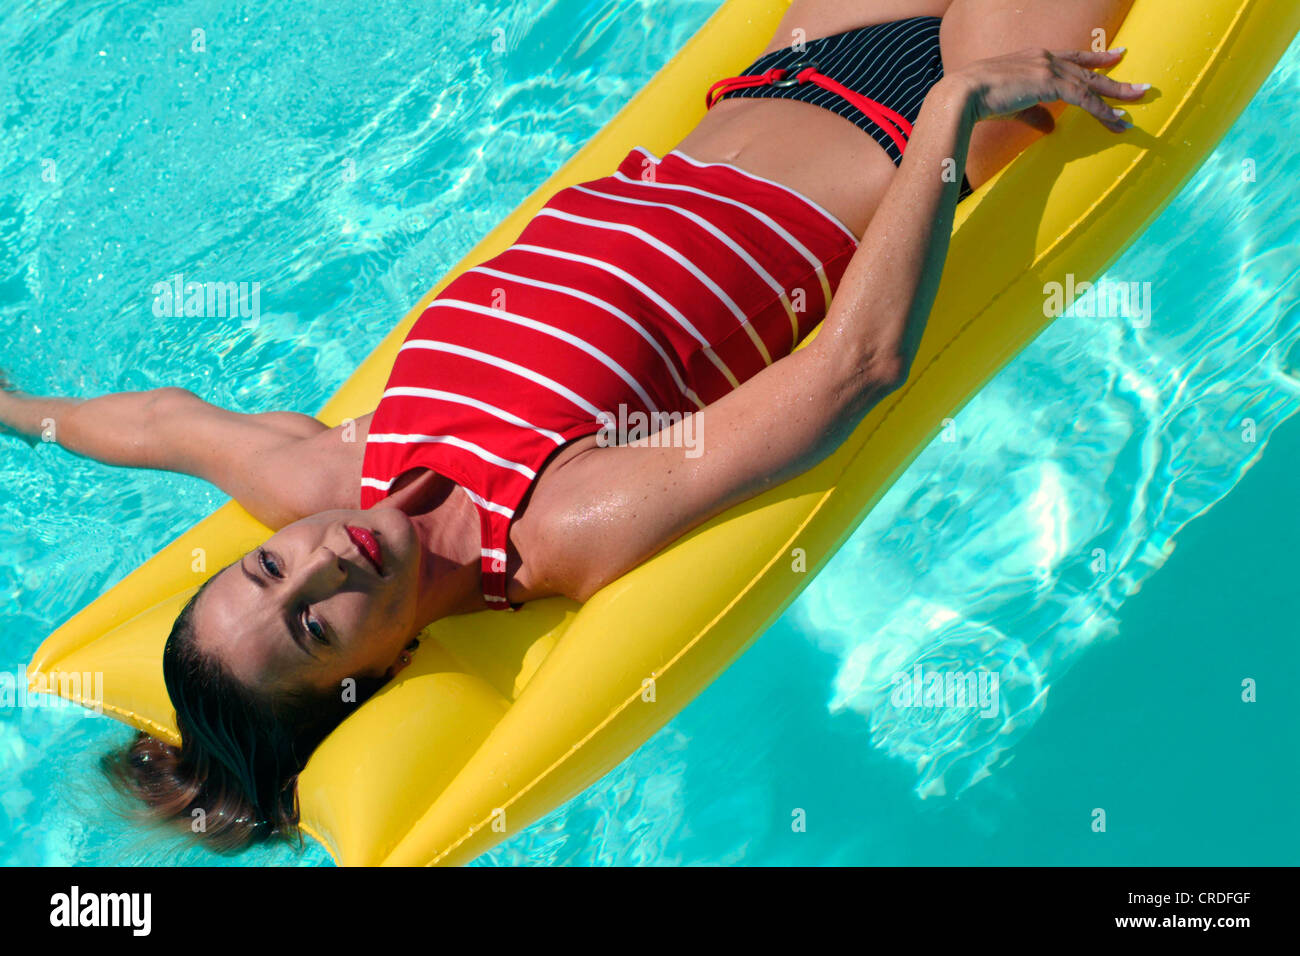 woman lying on an air mattress in a swimming pool Stock Photo